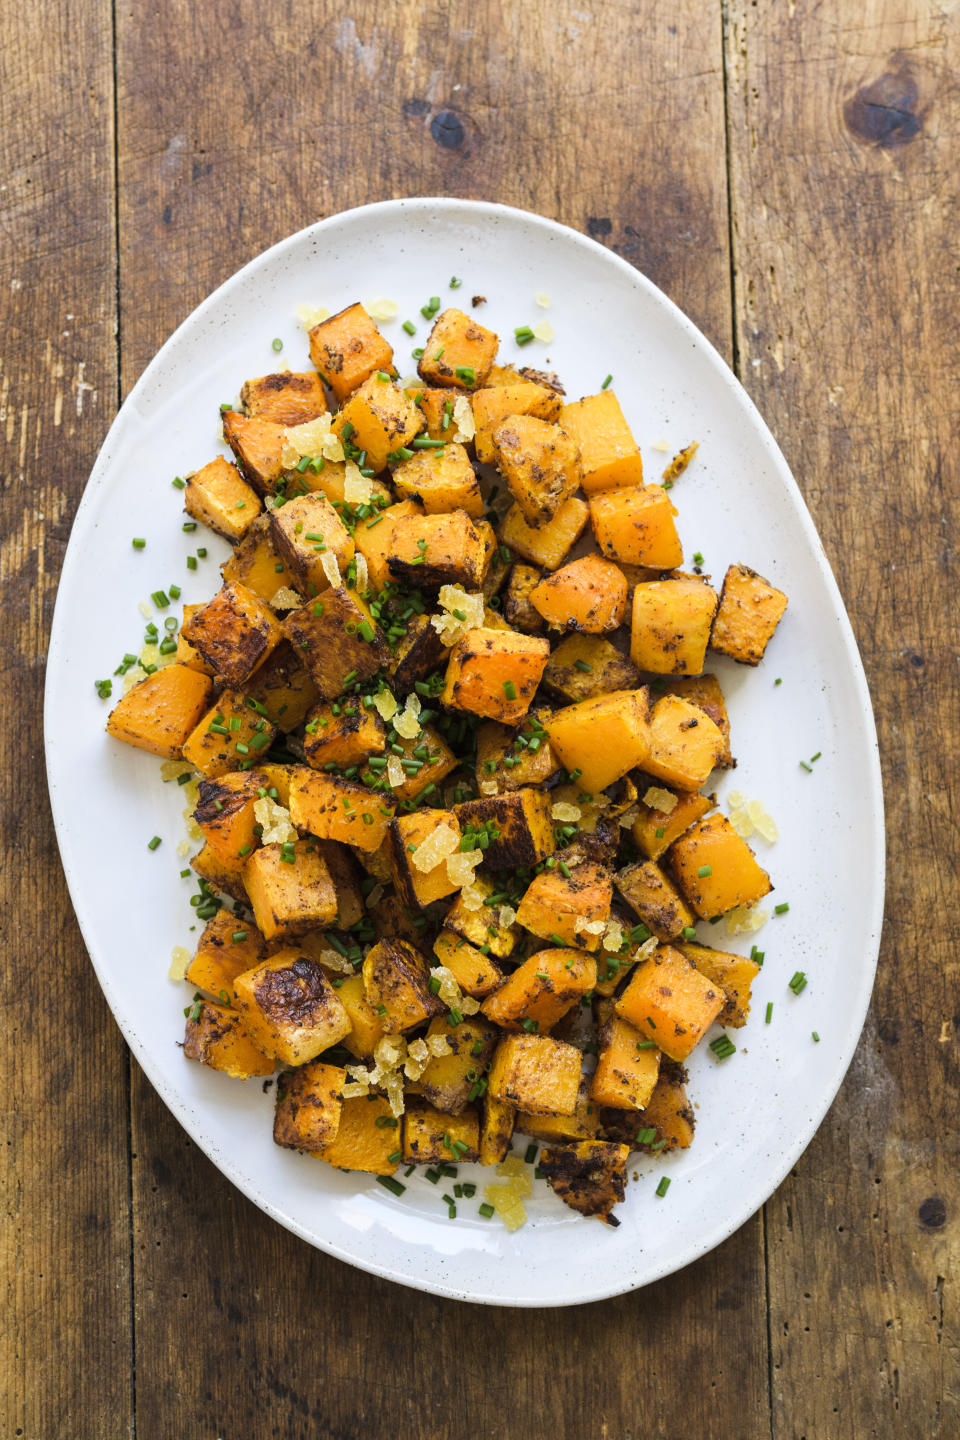 This image released by Milk Street shows a recipe for roasted butternut squash with ginger and five-spice. (Milk Street via AP)